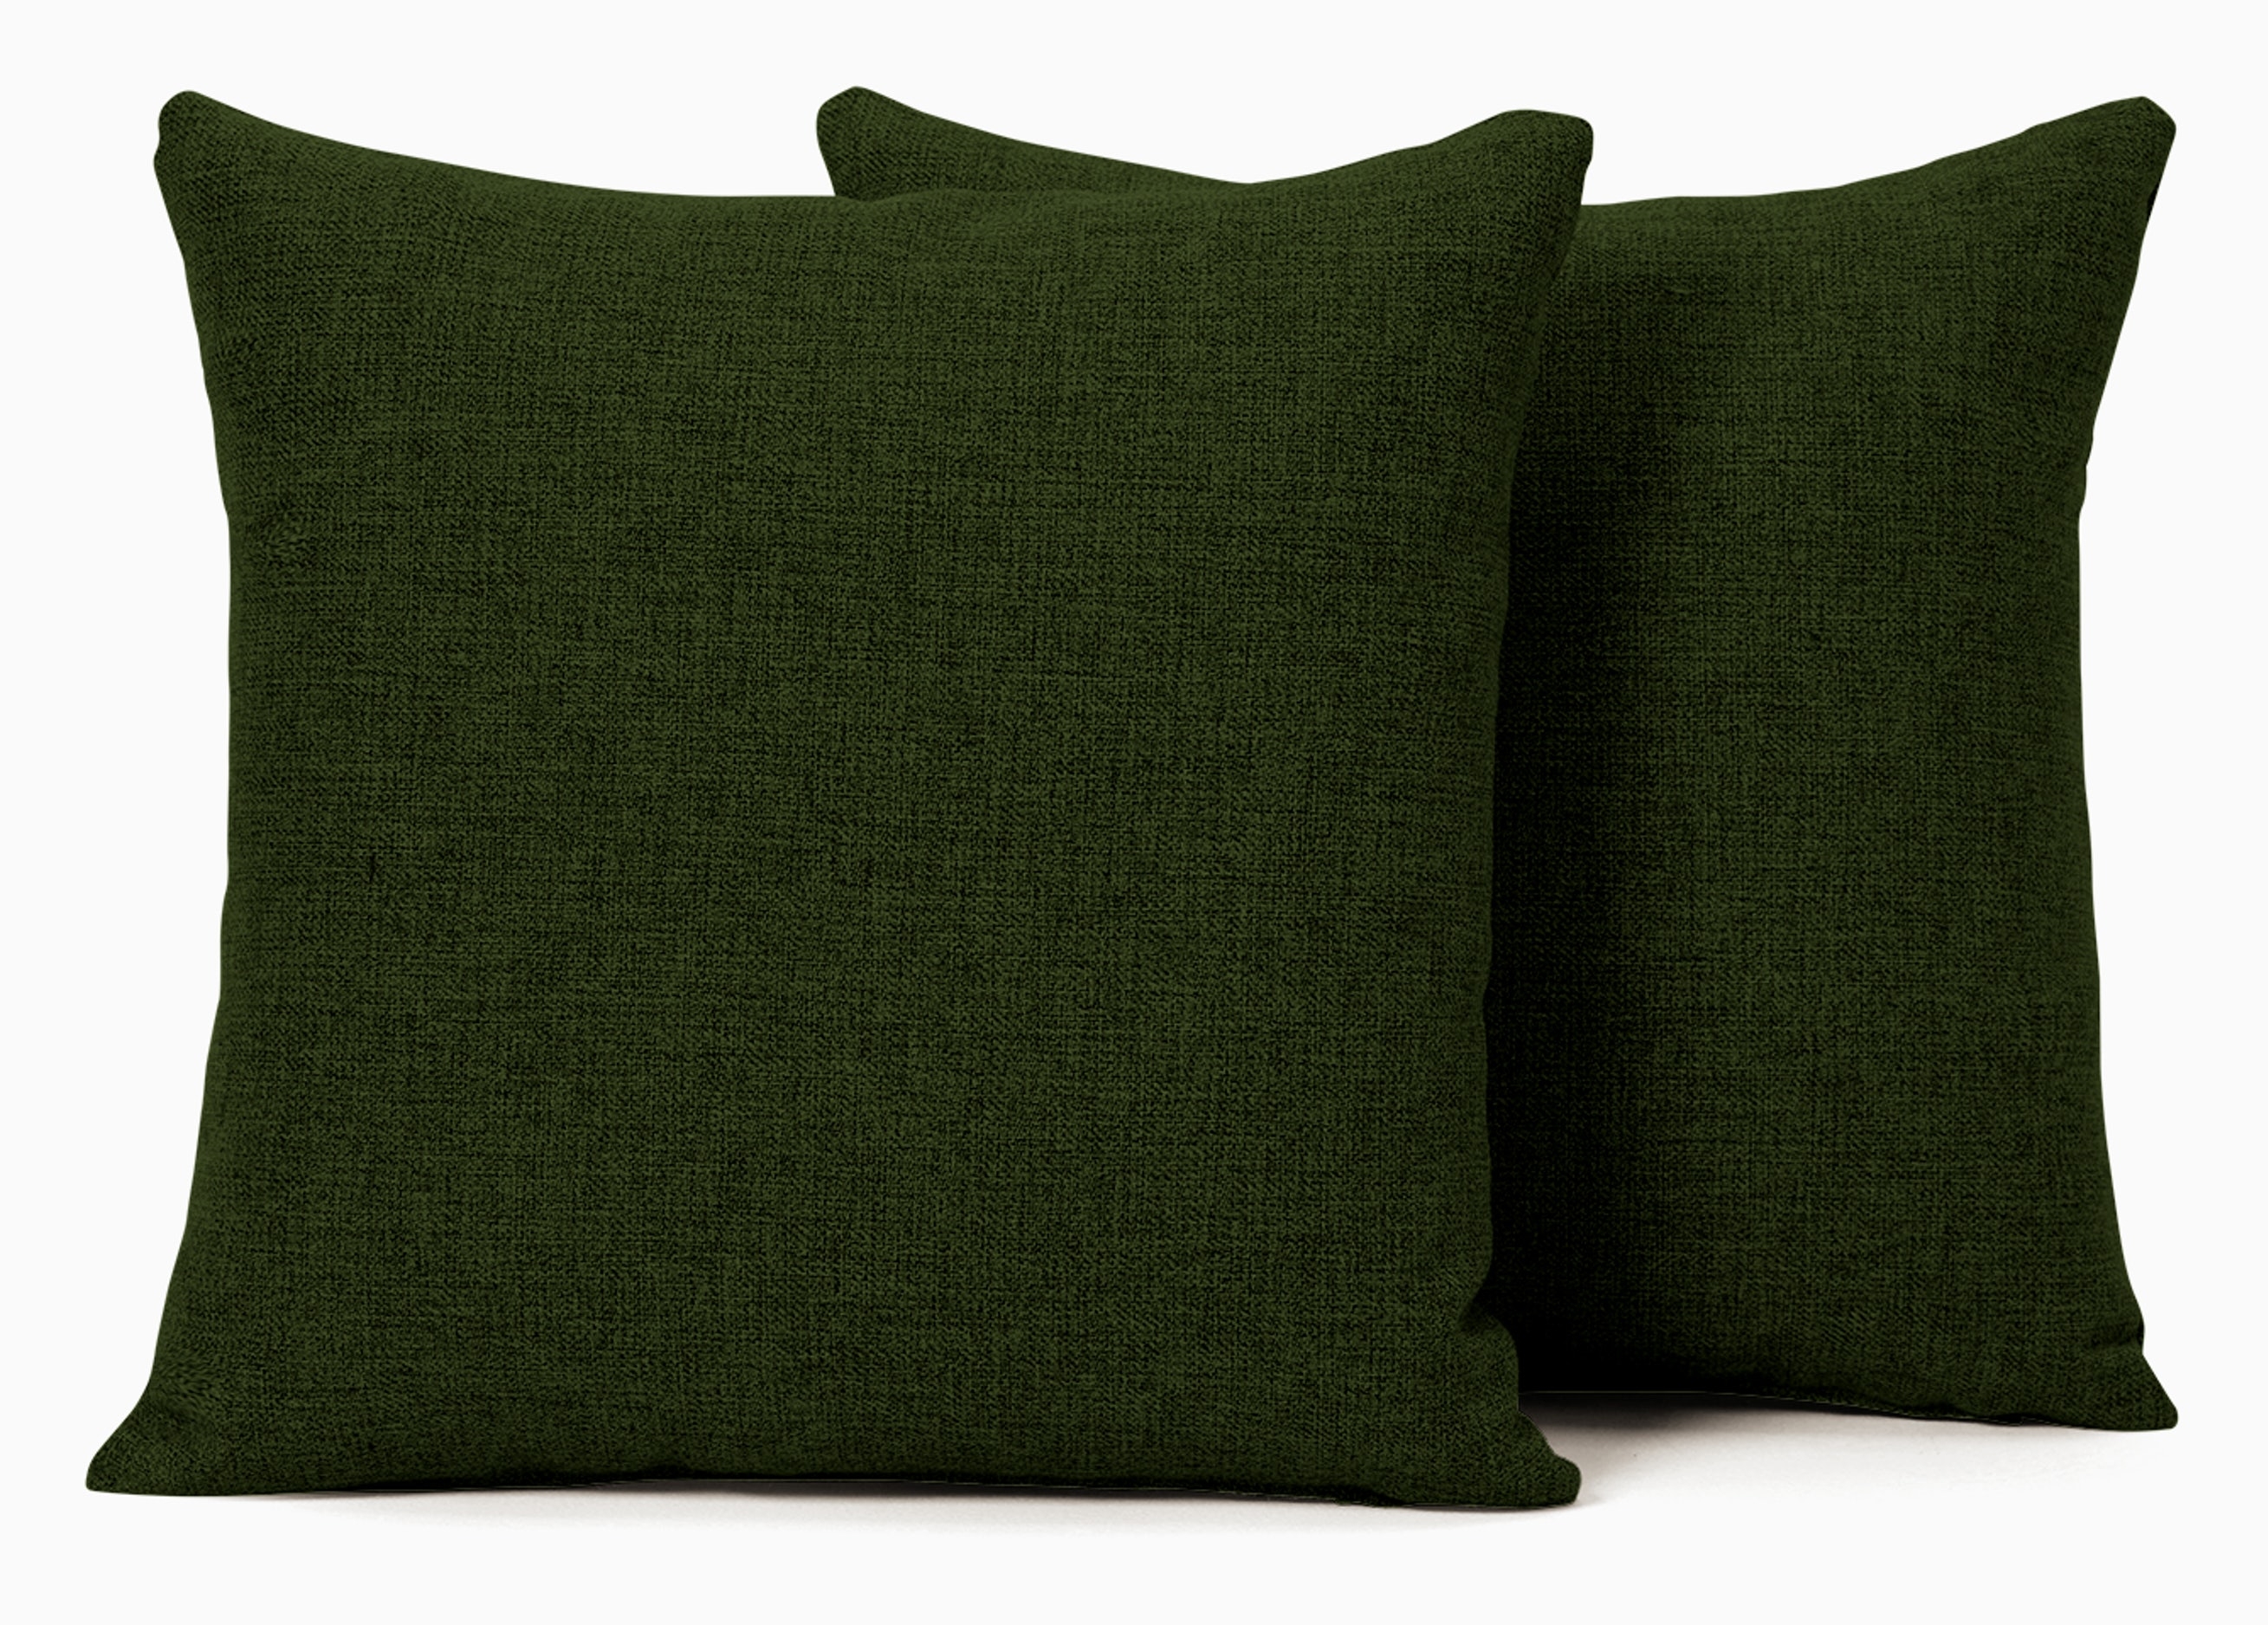 Decorative Knife Edge Pillows 18 x 18 (Set of 2) - Royale Forest - Image 0